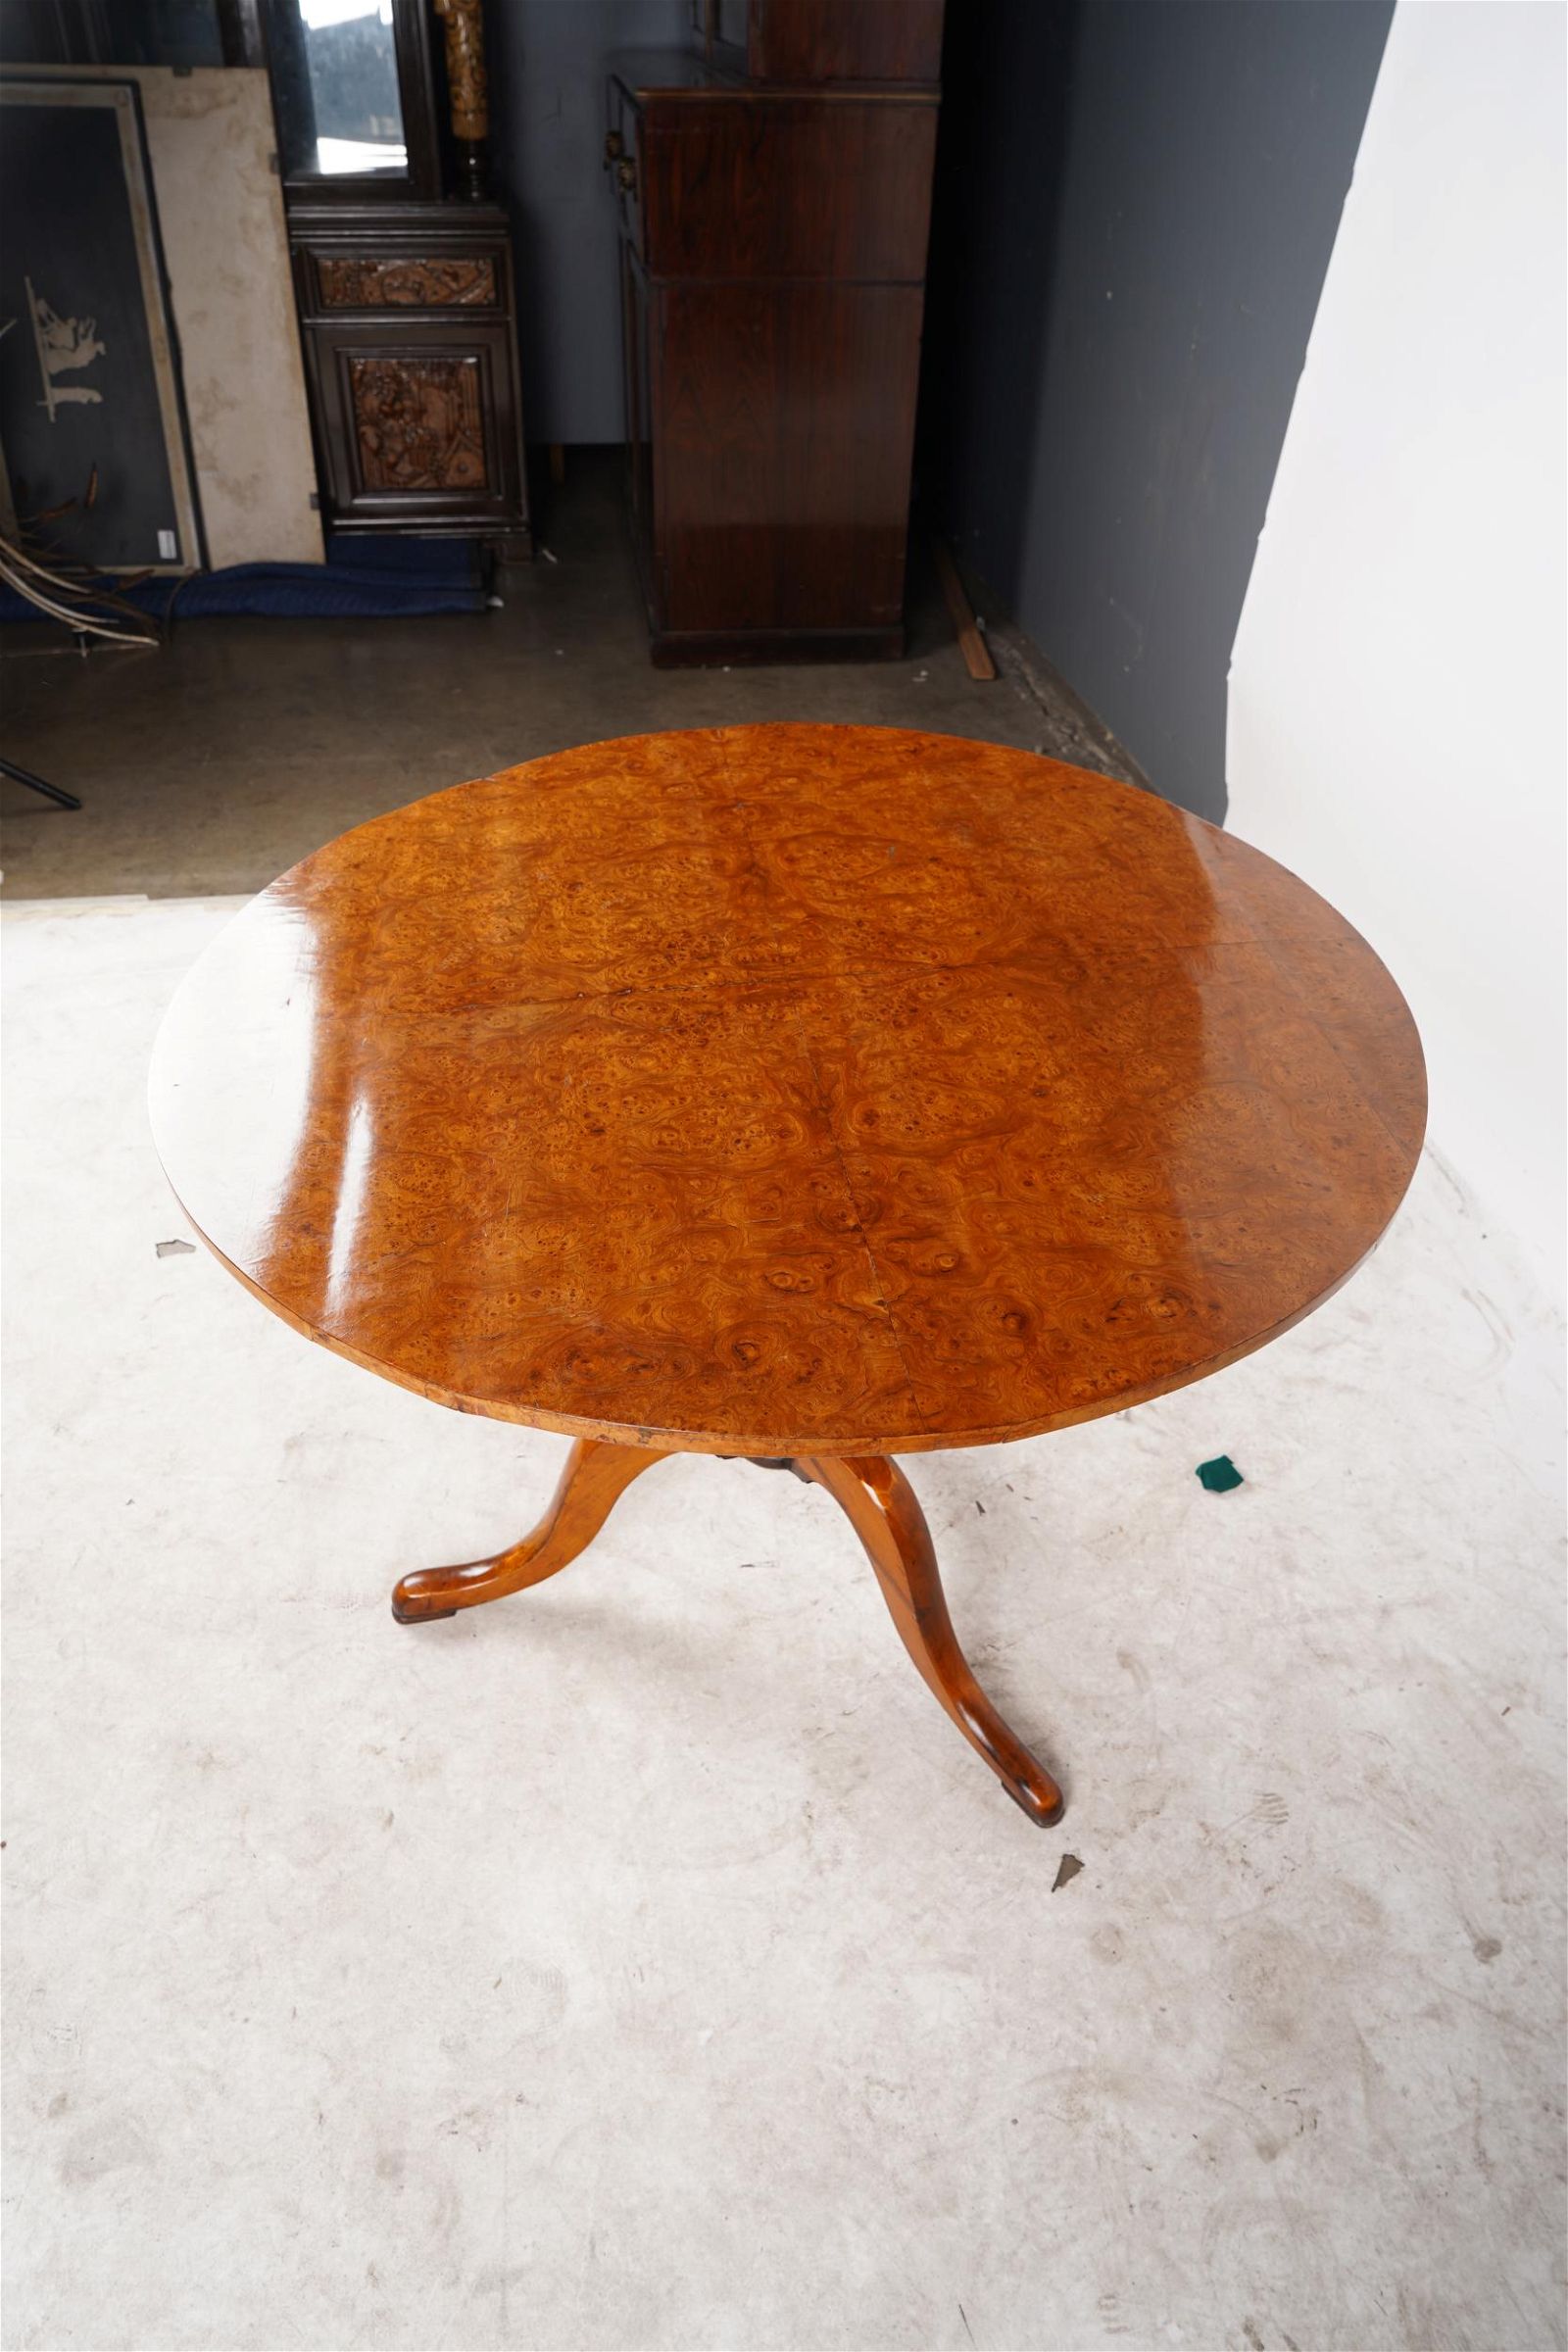 AF1-011:  LATE 18TH CENTURY AMERICAN FEDERAL PERIOD MAPLE TILT TOP SIDE TABLE